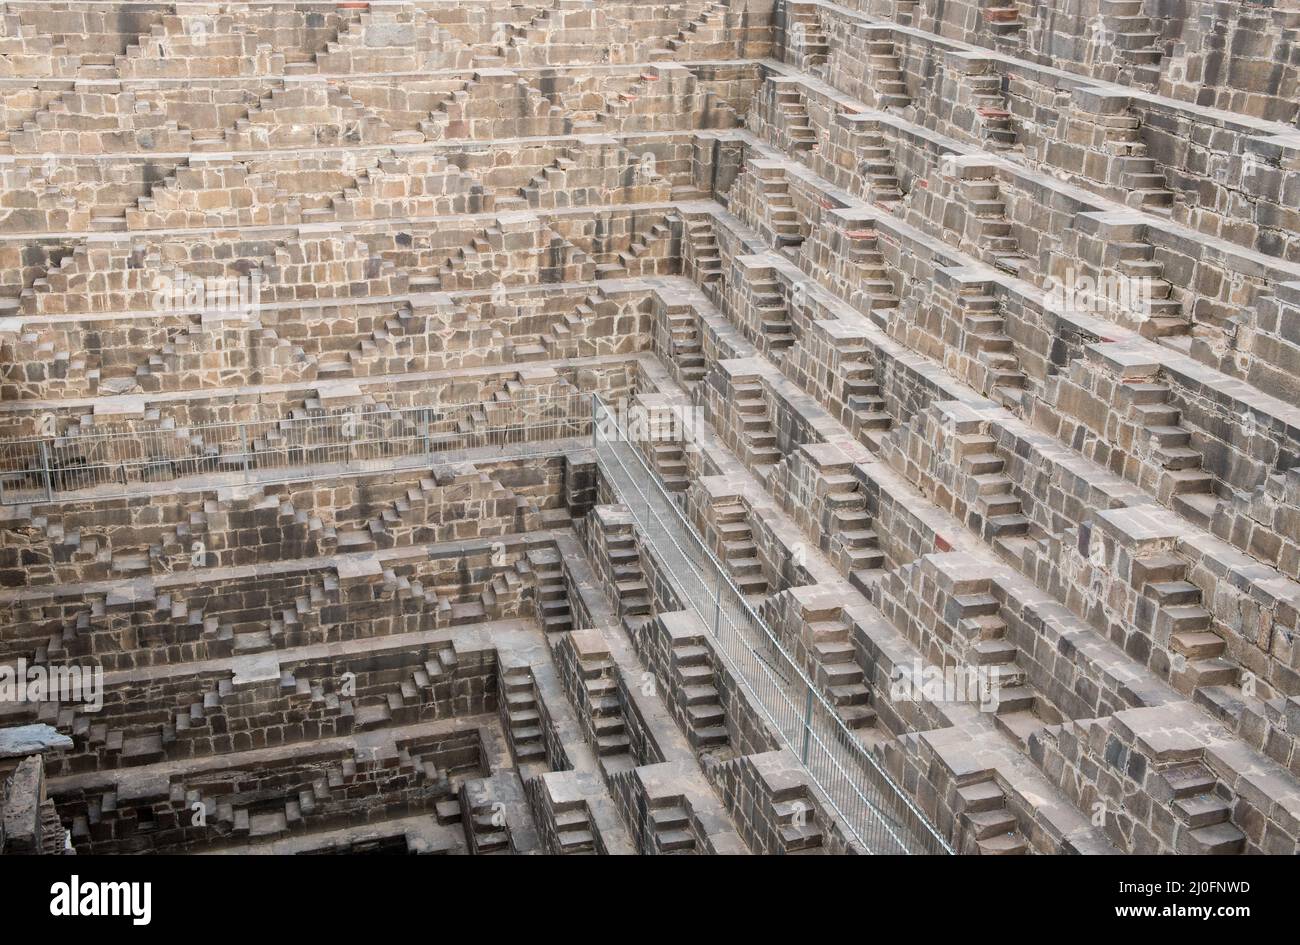 Ancient famous Stepwell of  Chand Baori, India Stock Photo